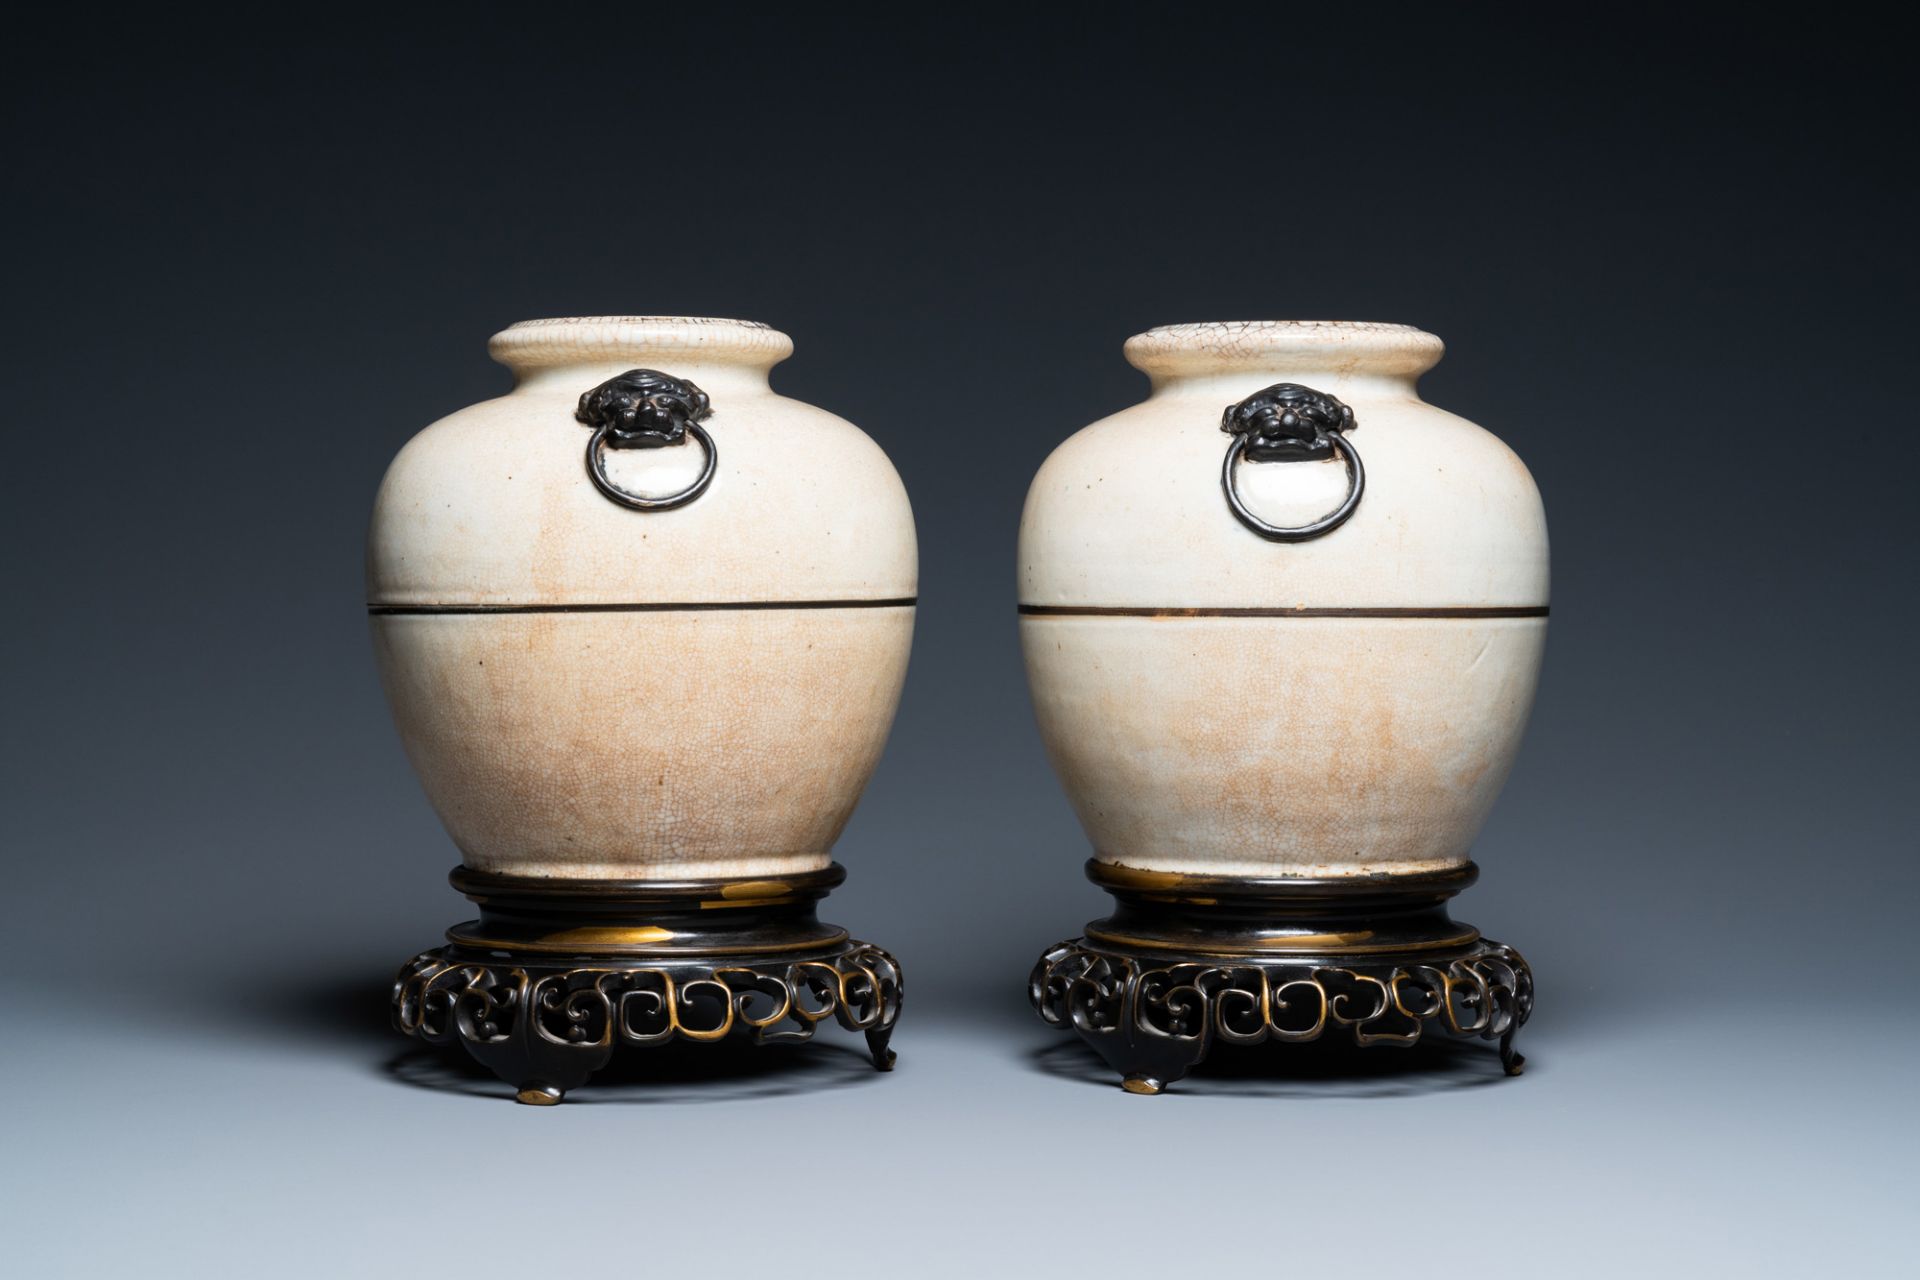 A pair of Chinese monochrome Nanking crackle-glazed vases on reticulated bronze stands, 19th C. - Image 2 of 6